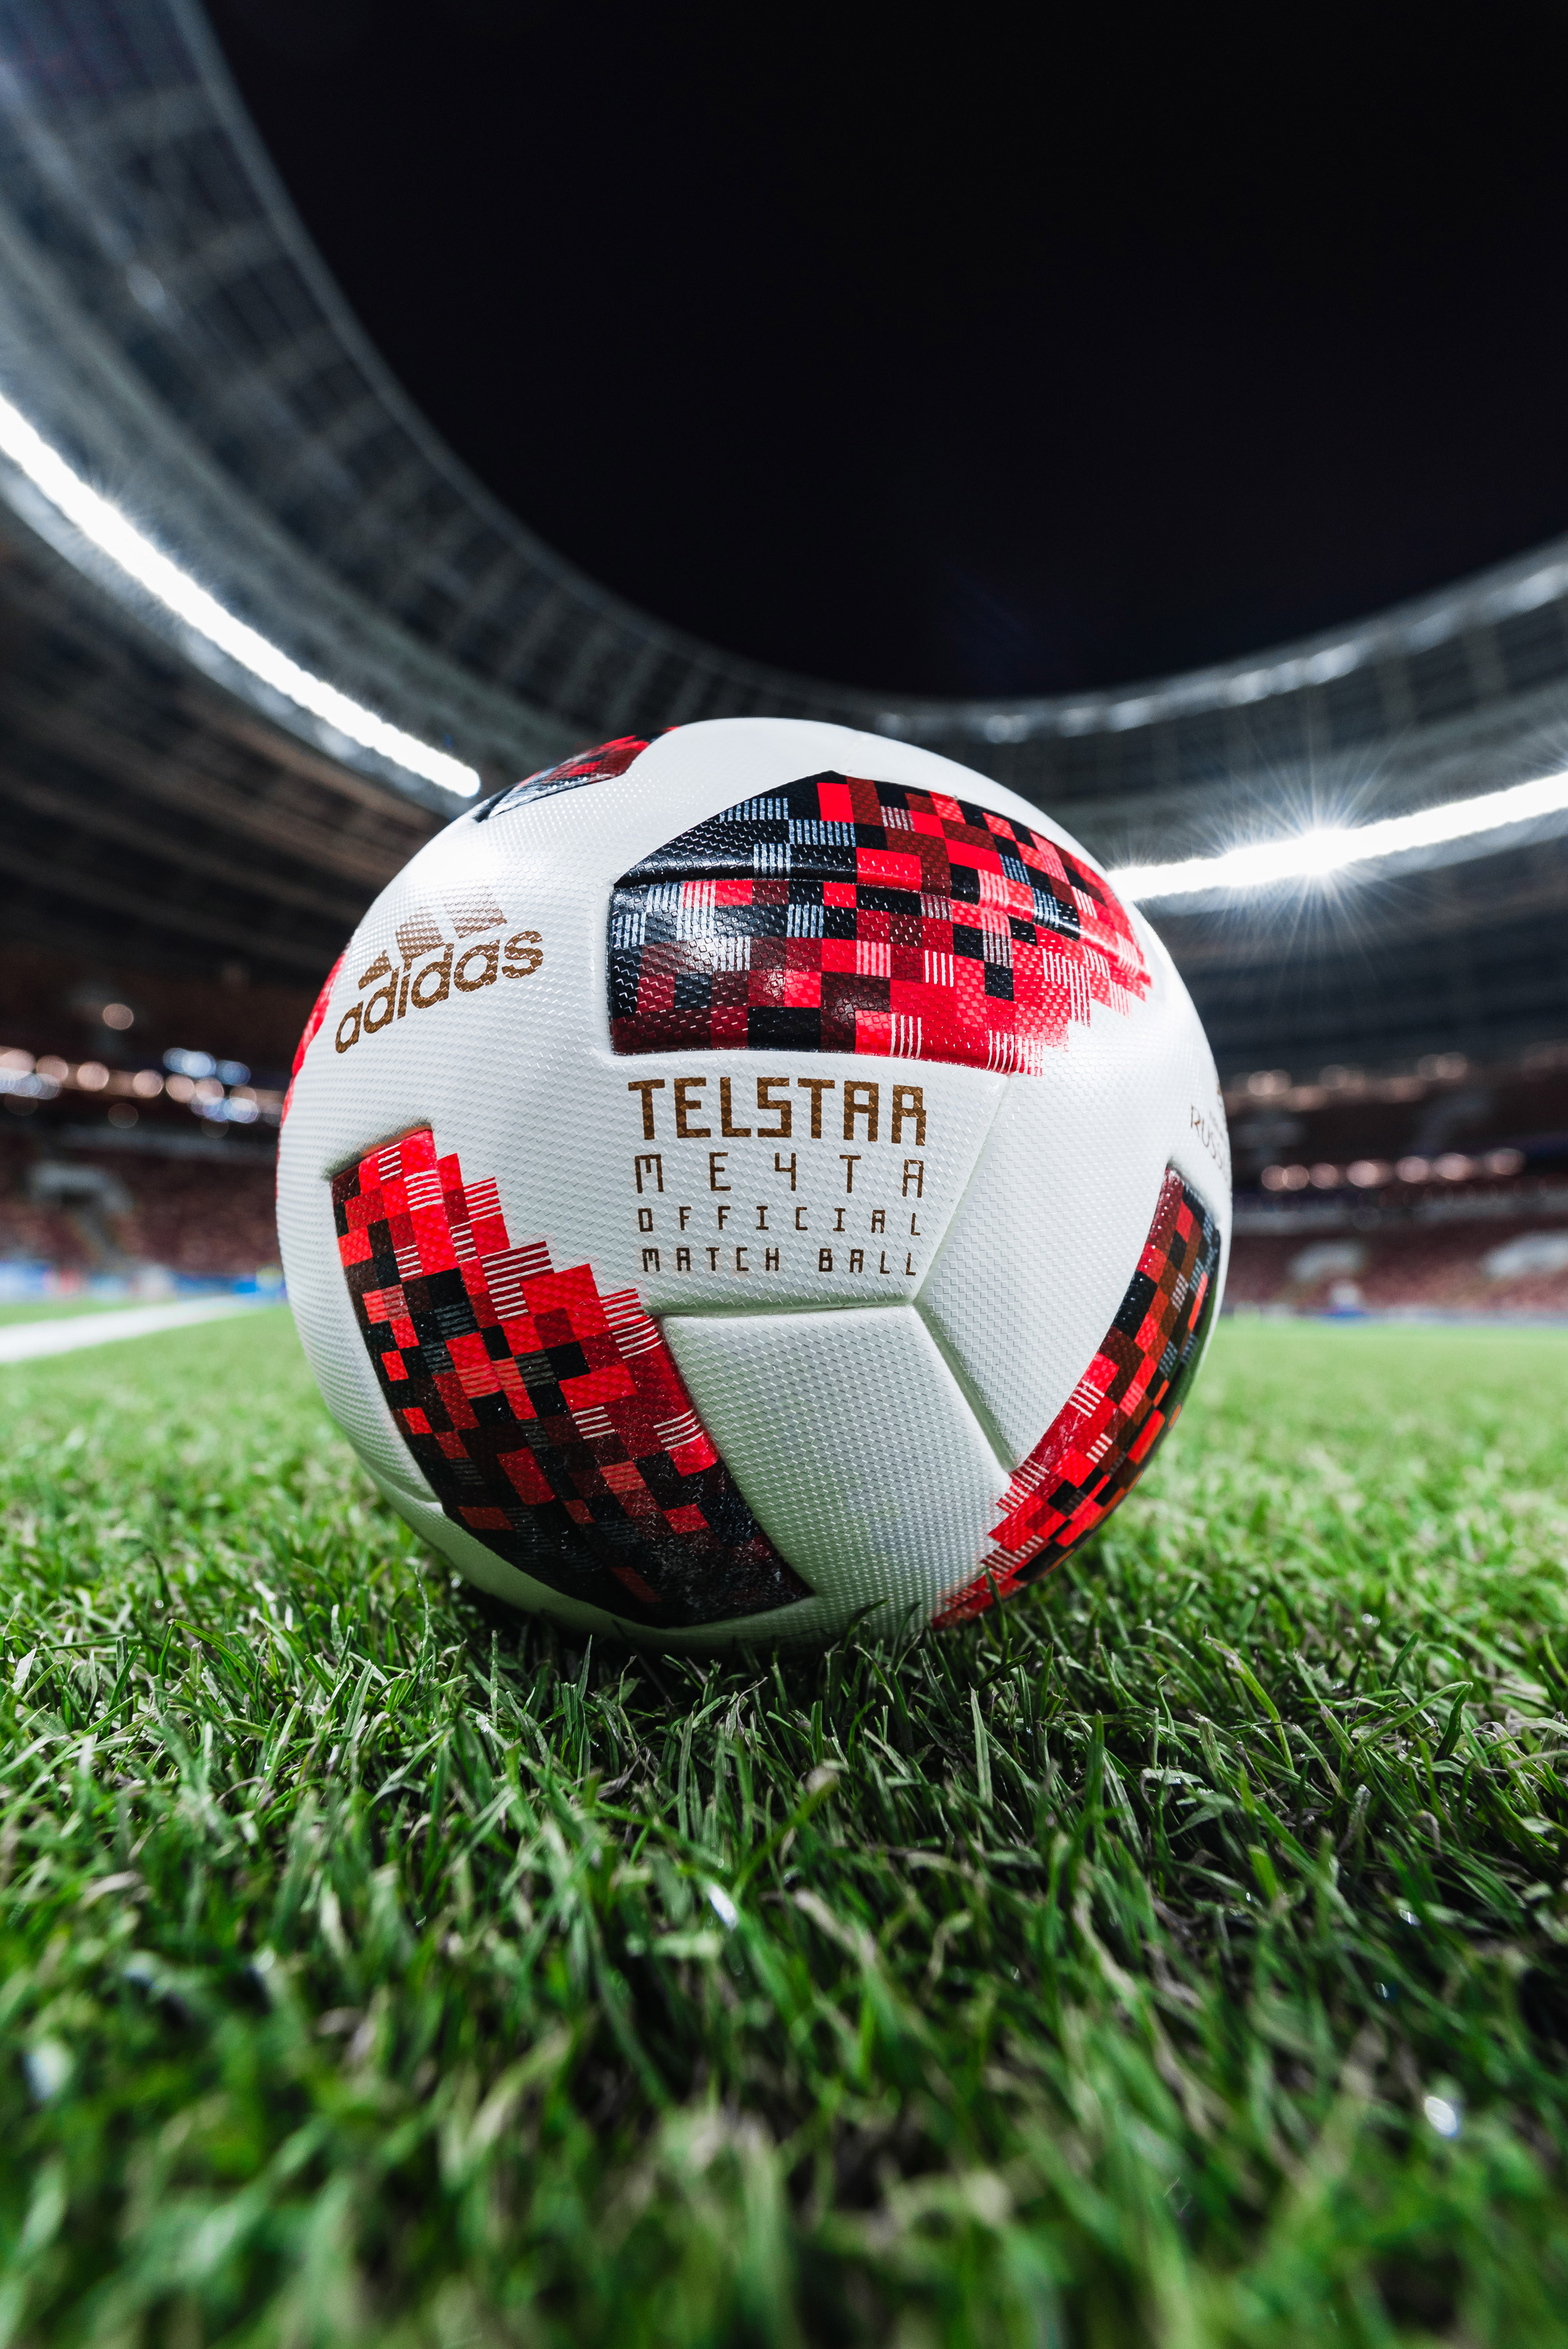 Galleta paz caricia Adidas reveals interactive match ball for knockout stages of World Cup